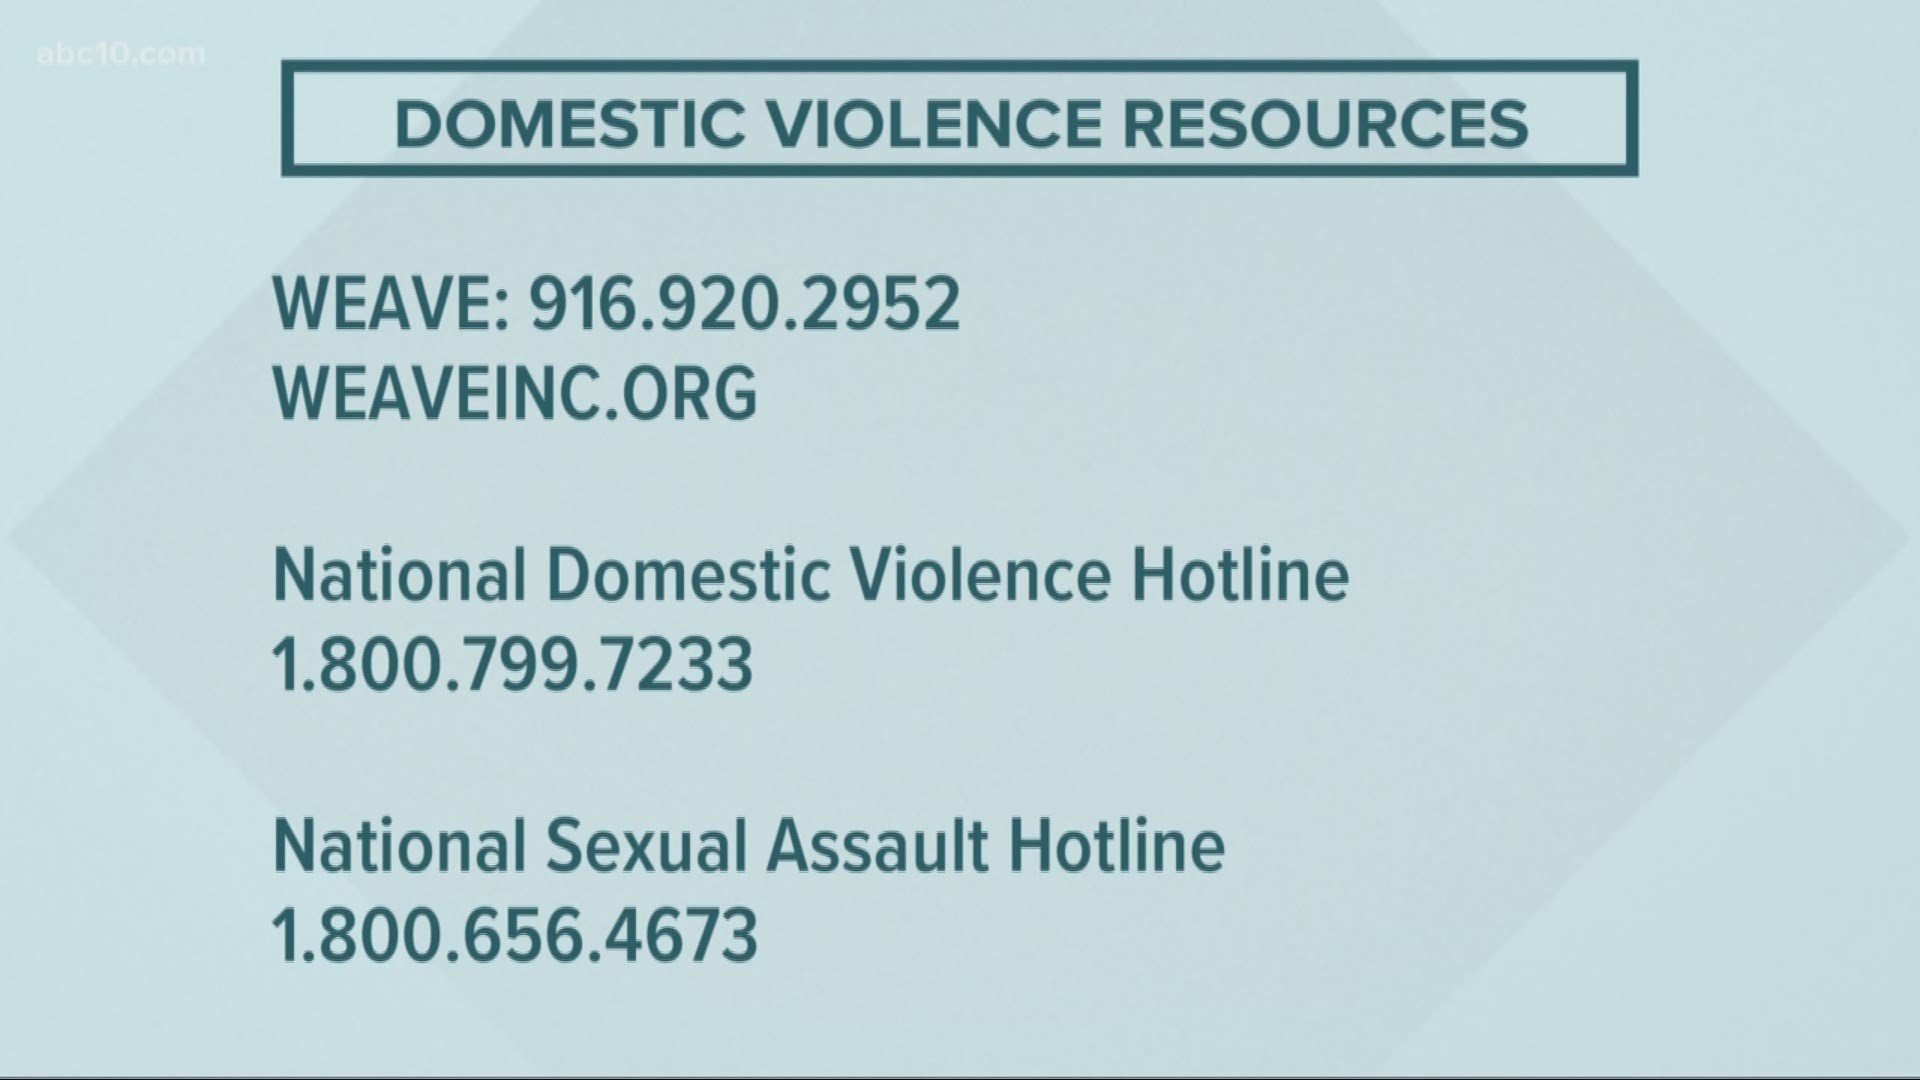 Domestic violence can be compounded as people are asked to stay at home. Here's what's being done to get help to people who need it.